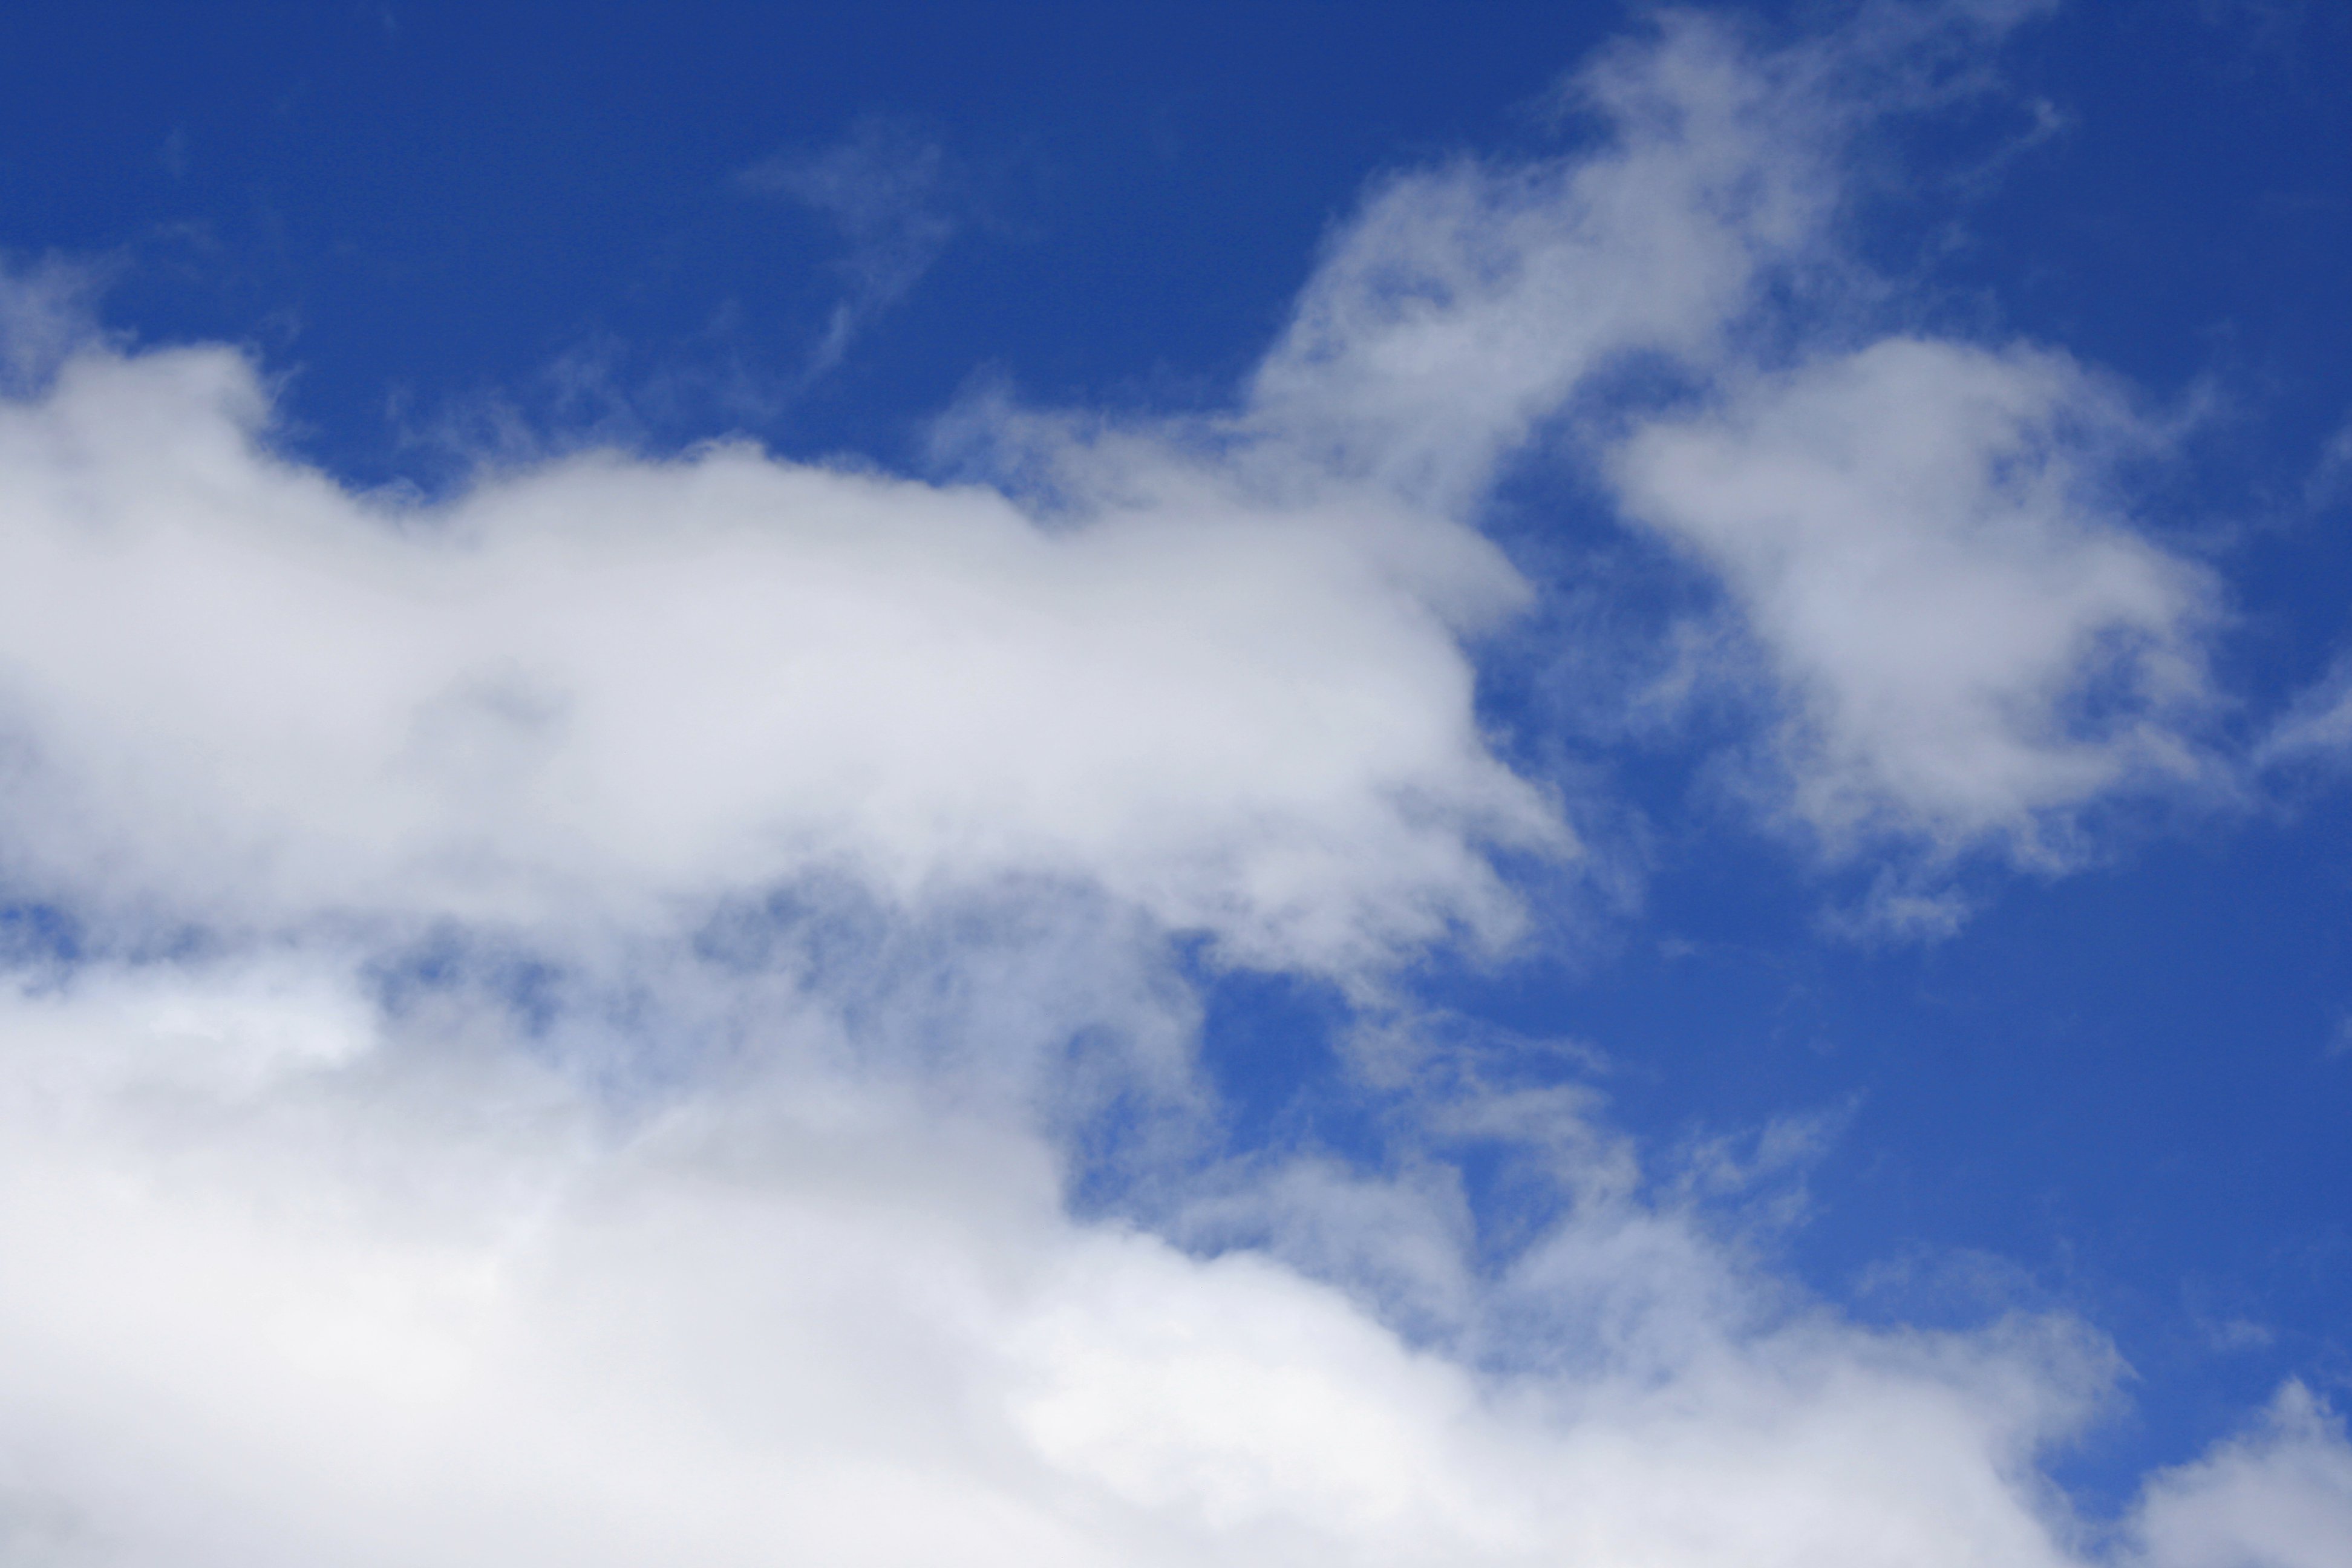 Blue Sky with Fluffy White Clouds Picture | Free Photograph | Photos